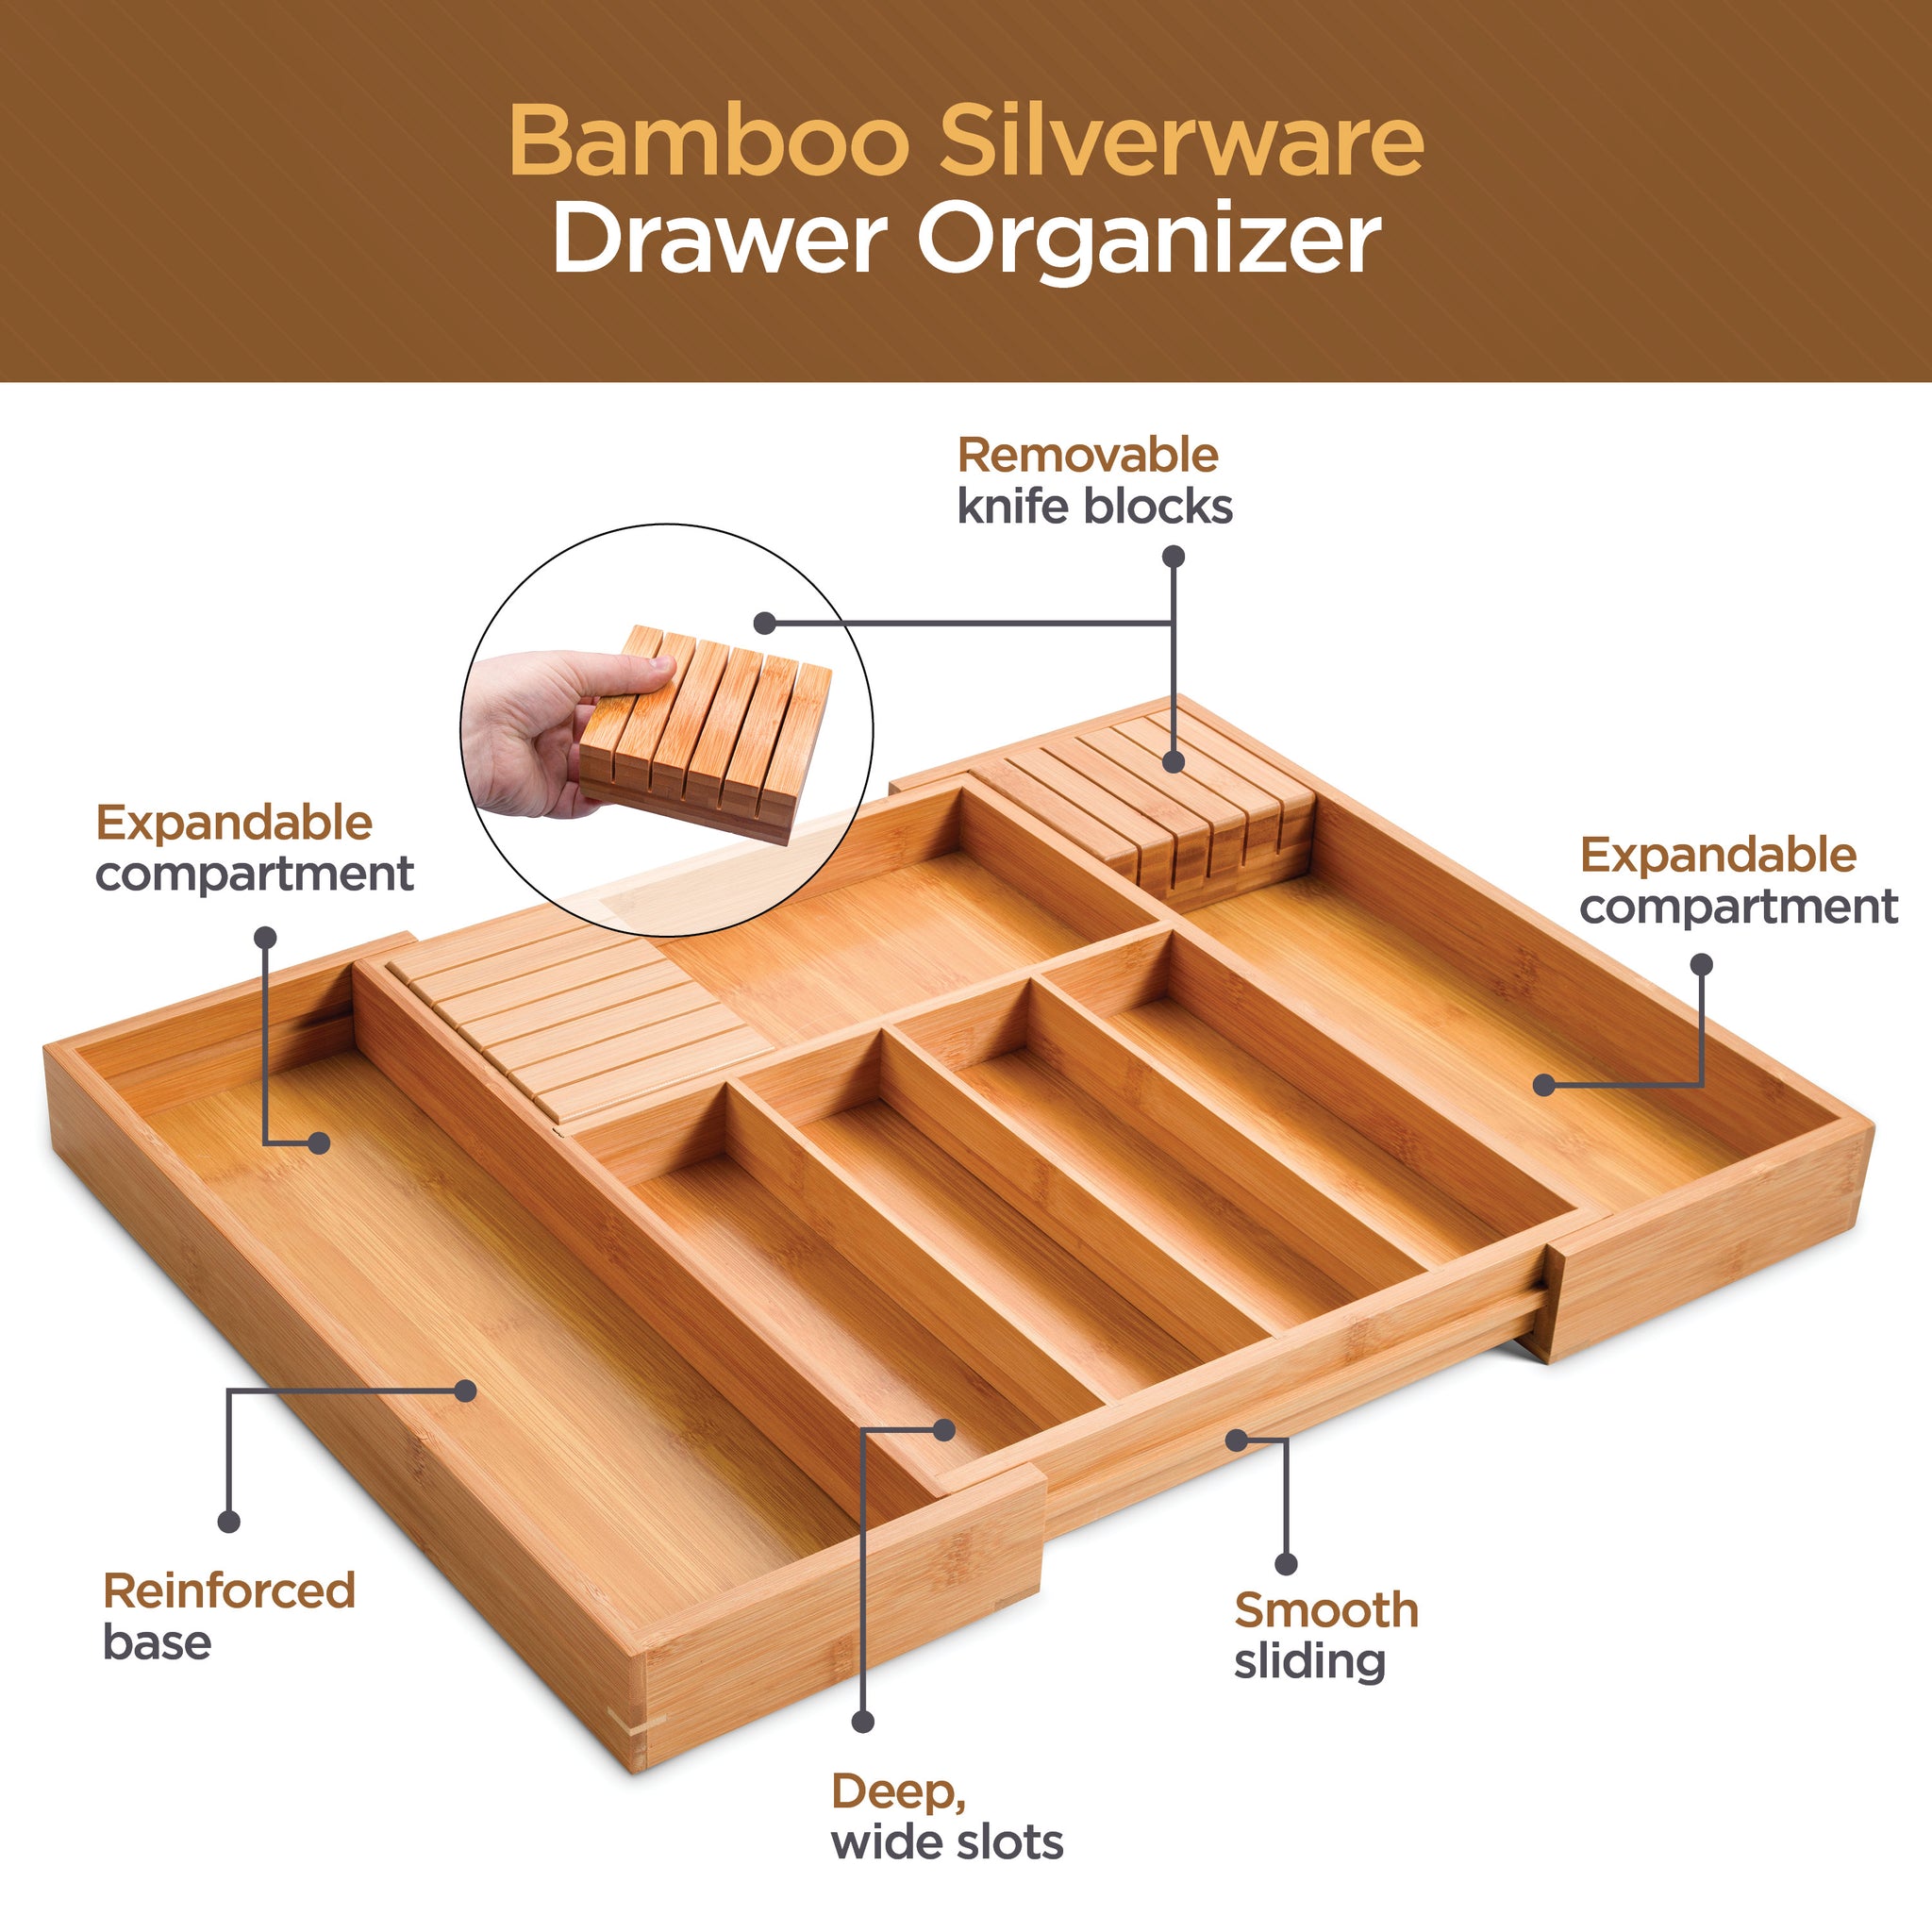 DrawerStore™ Bamboo Compact Cutlery Organizer